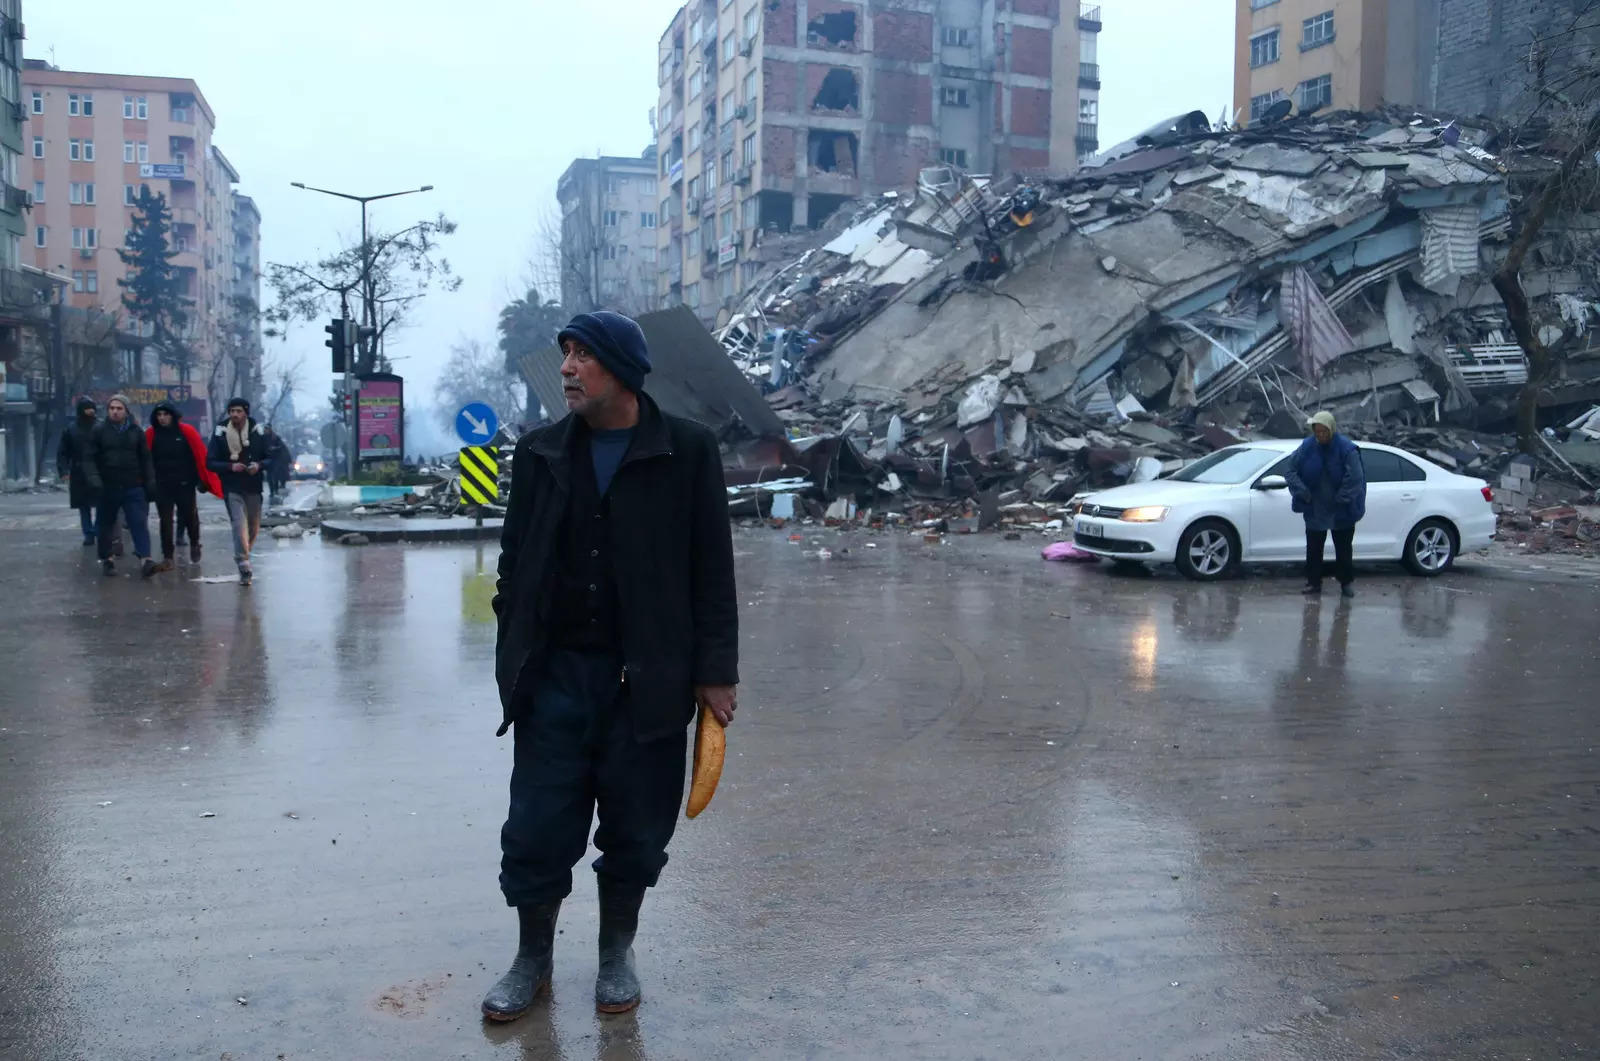 These images show devastation caused by earthquake in Turkey and Syria